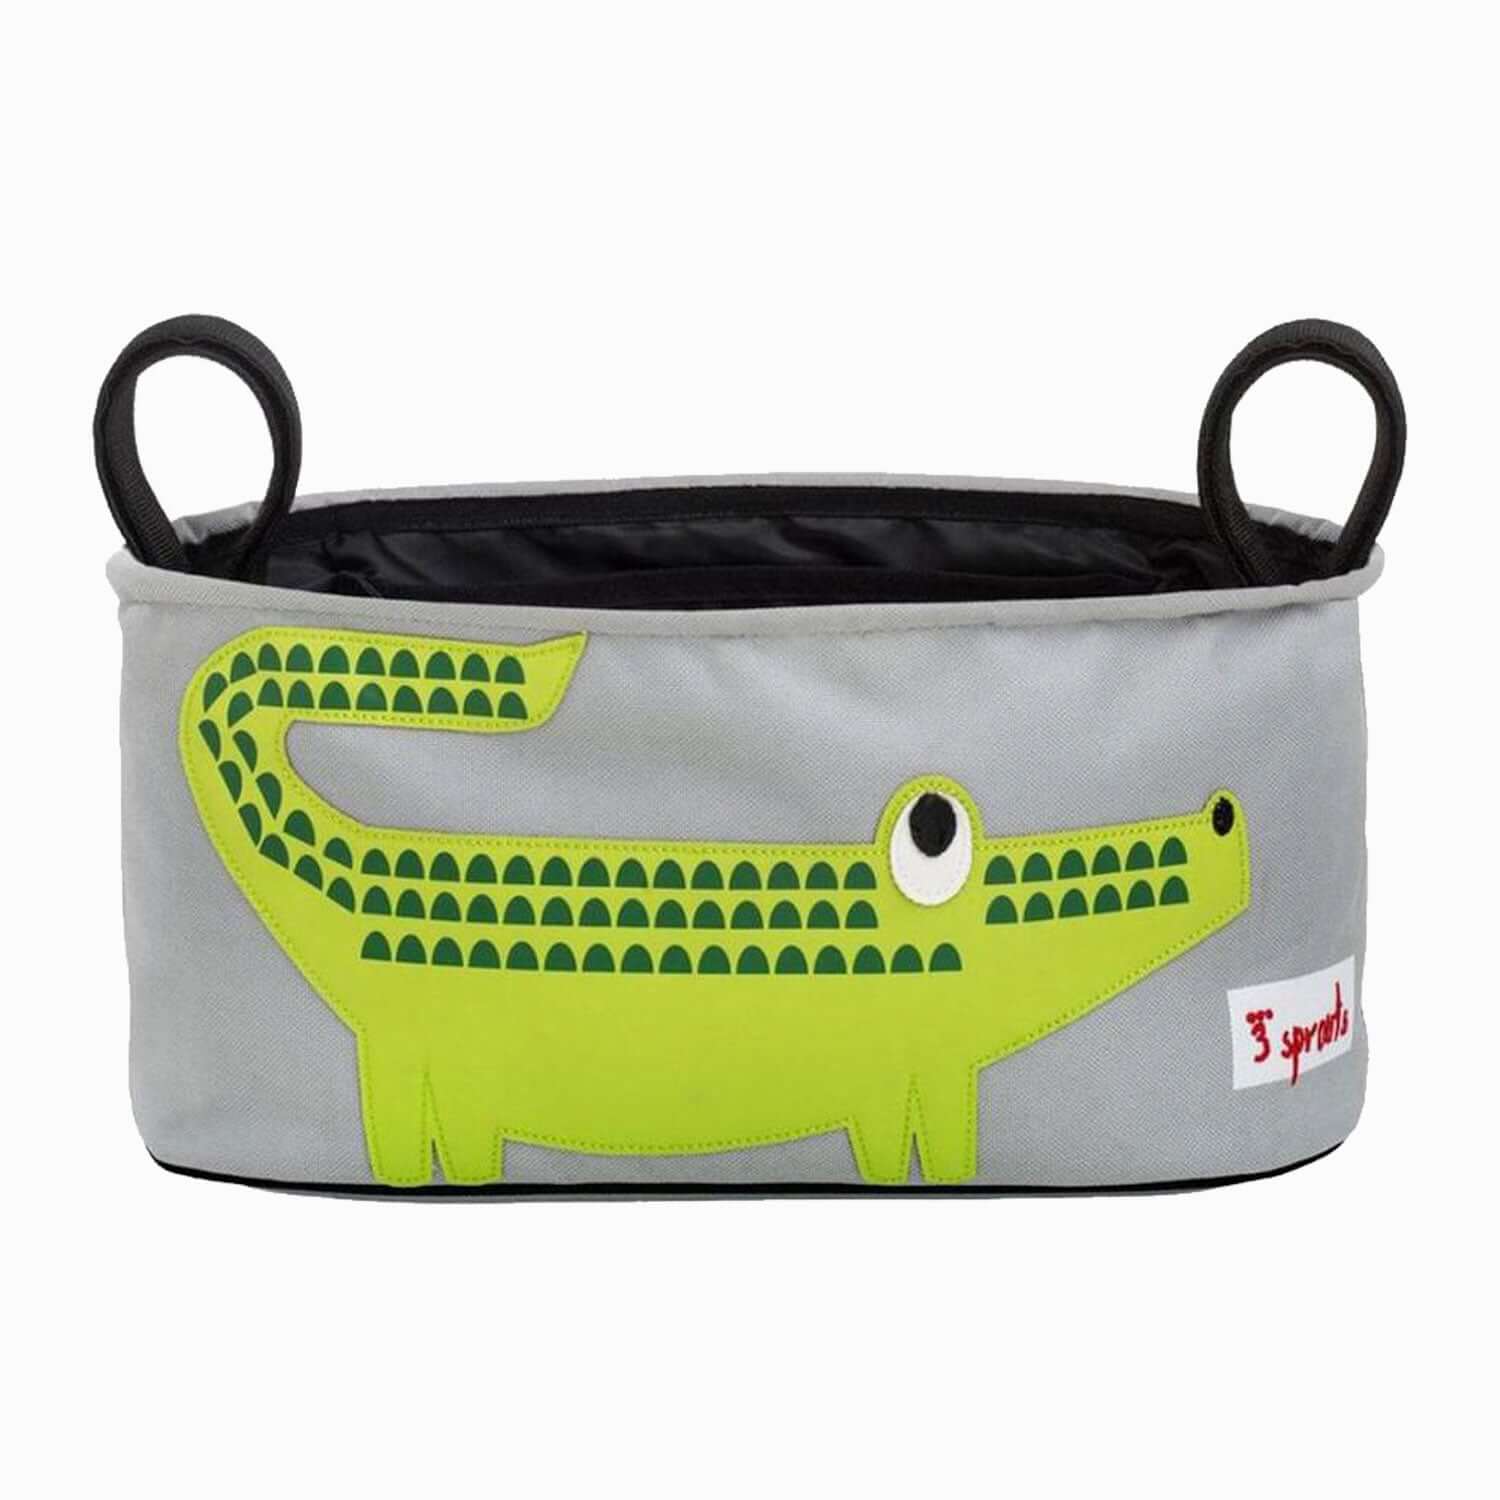 An image of 3 Sprouts Stroller Organiser Crocodile | Travel | SmallSmart.co.uk